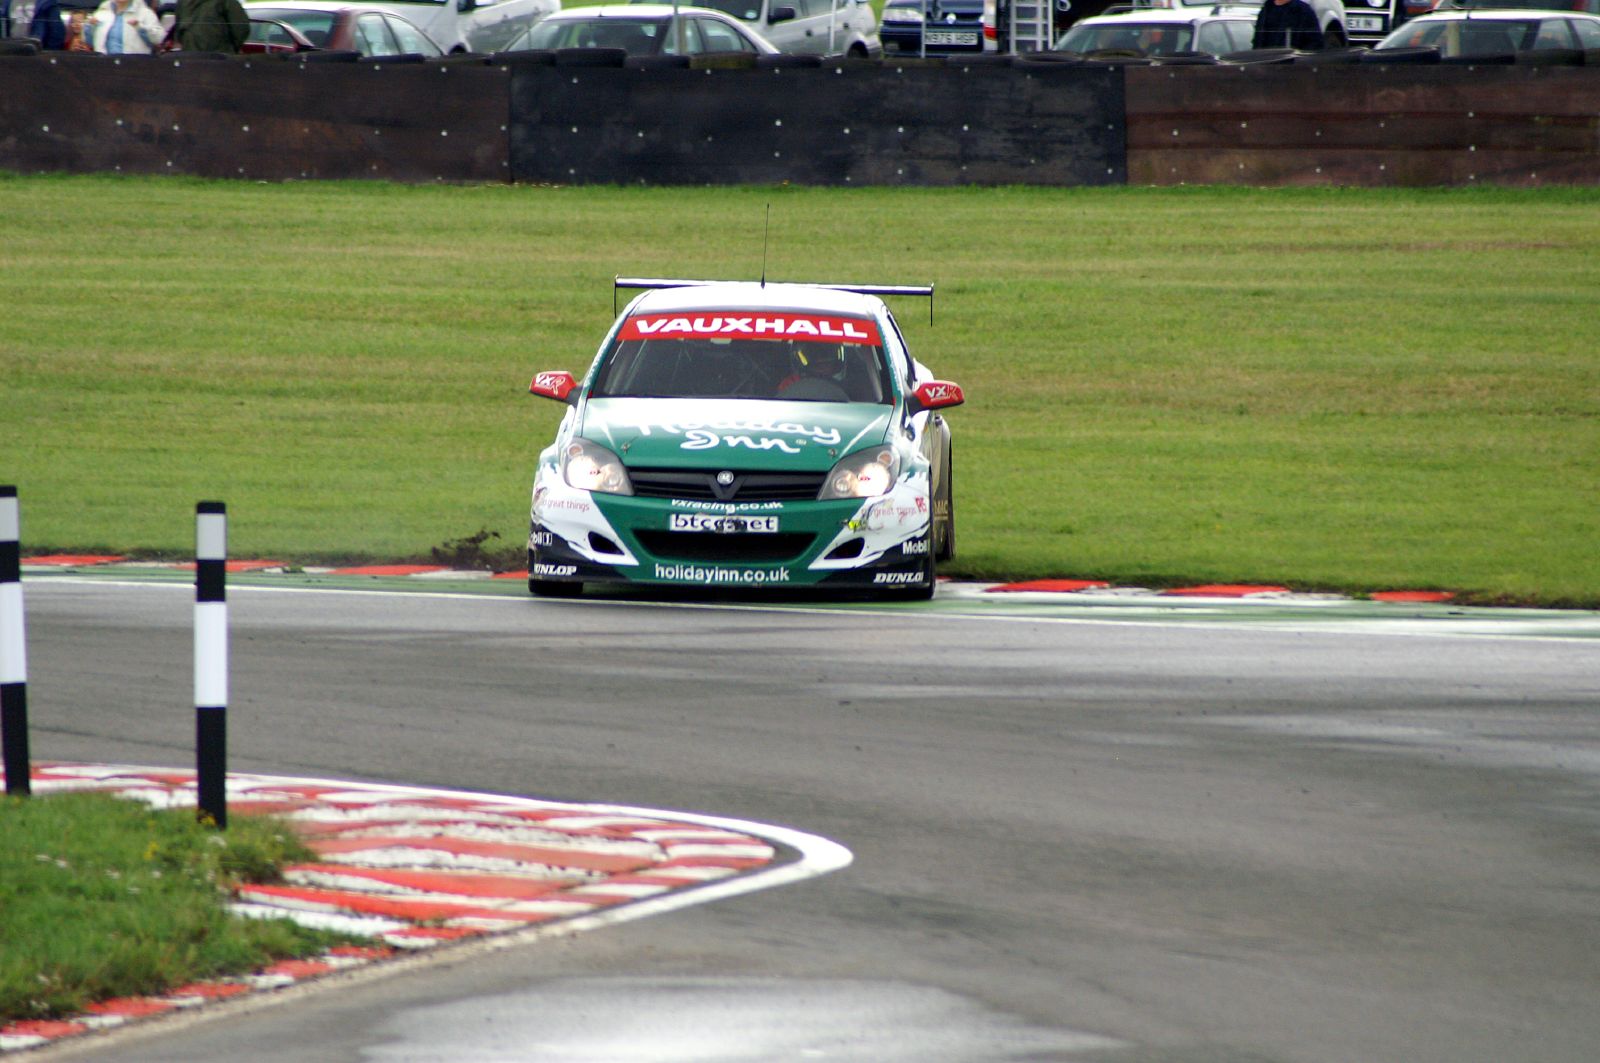 a small car racing around a turn on a wet track